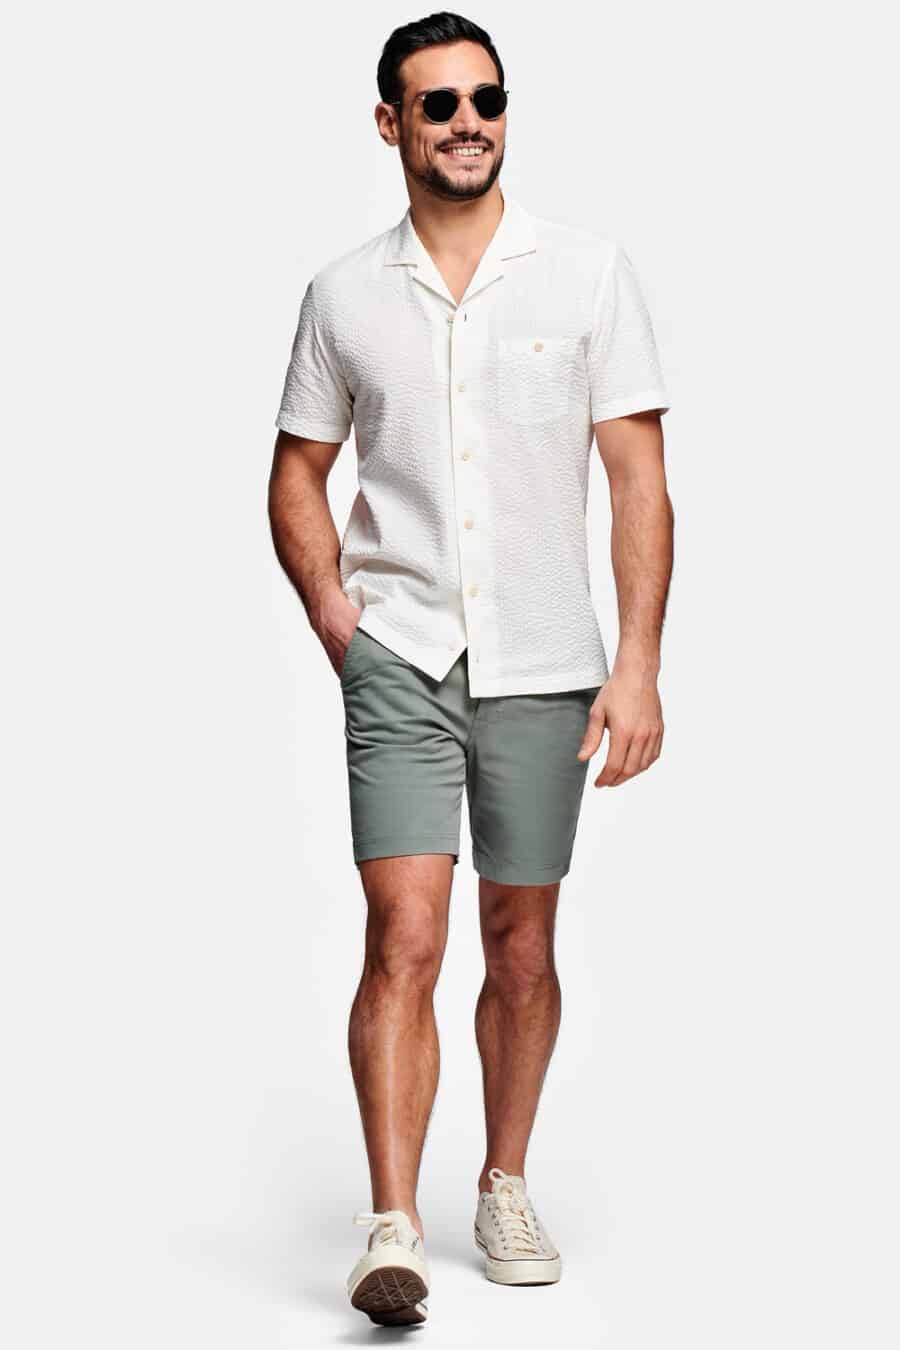 Men's green shorts, white camp collar shirt and off-white canvas sneakers outfit